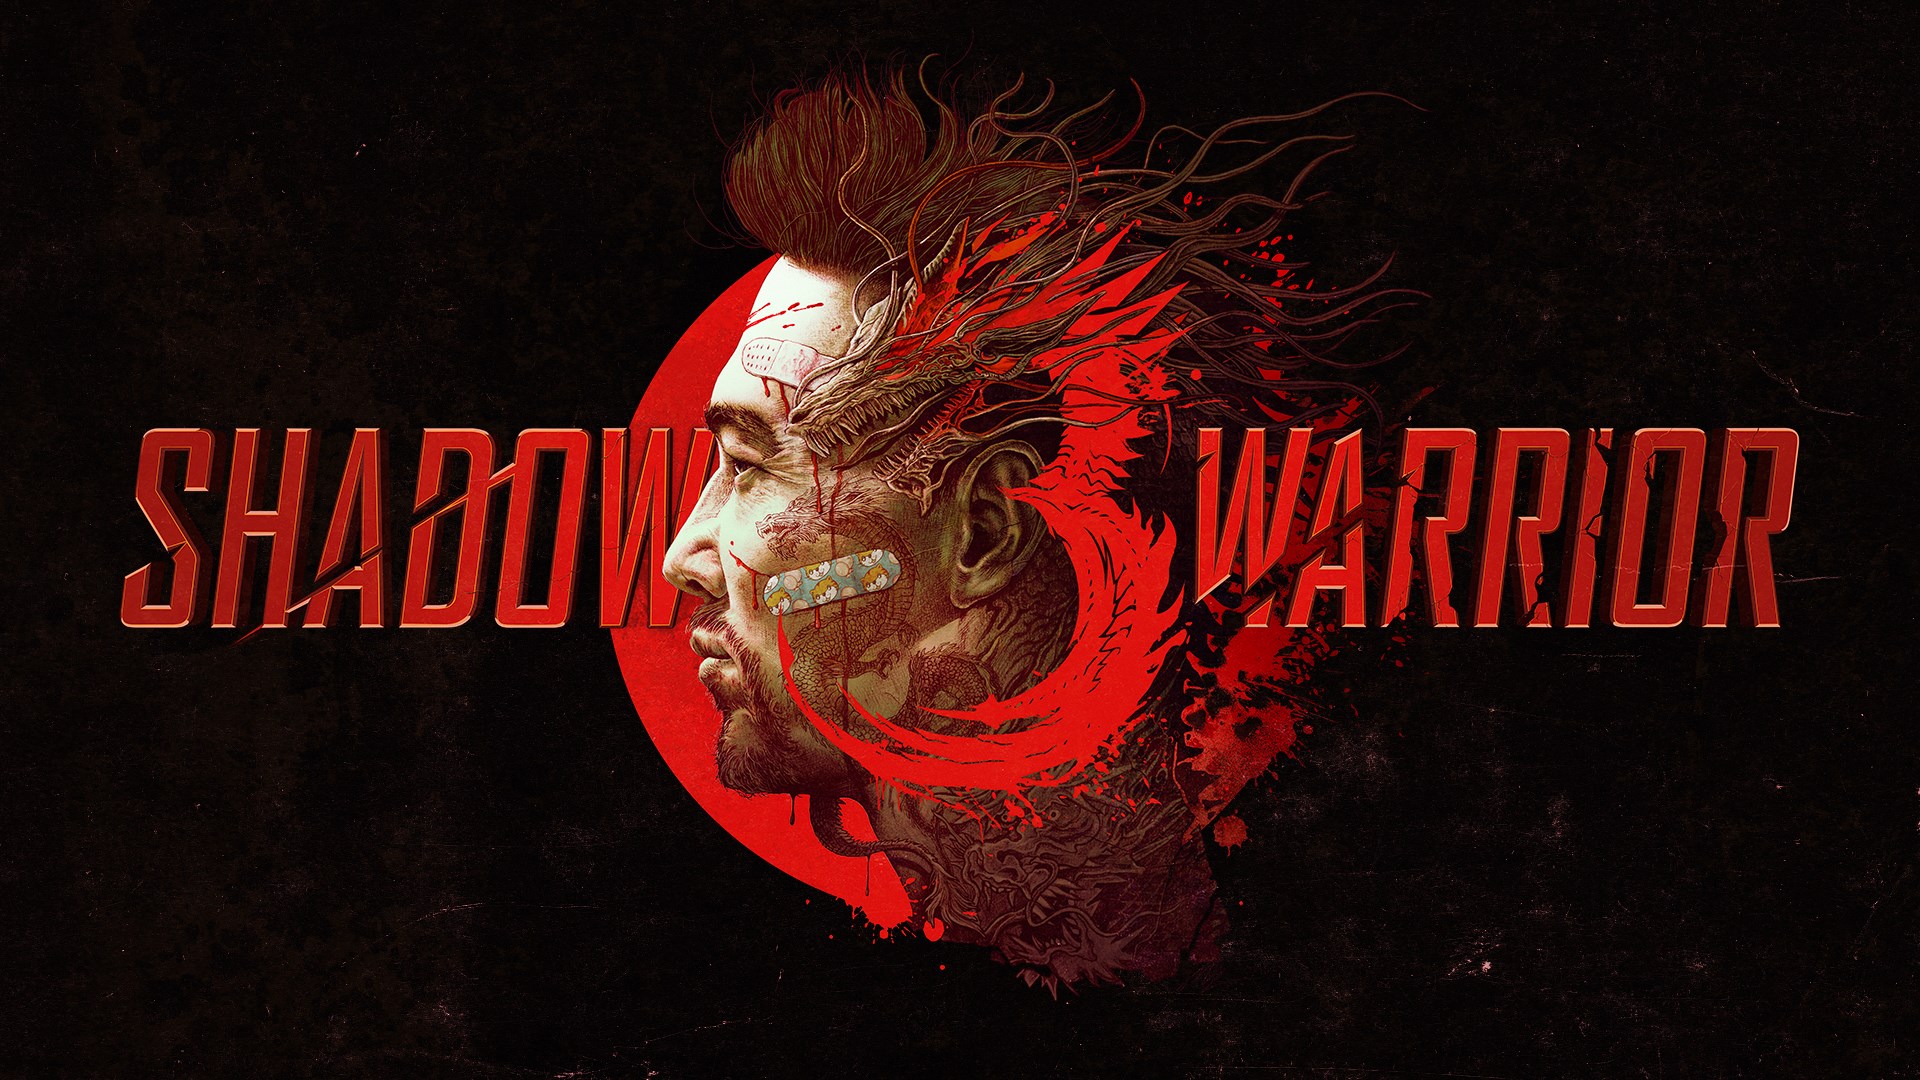 Shadow Warrior 3 Is Now Available For Digital Pre-order And
Pre-download On Xbox One And Xbox Series X|S